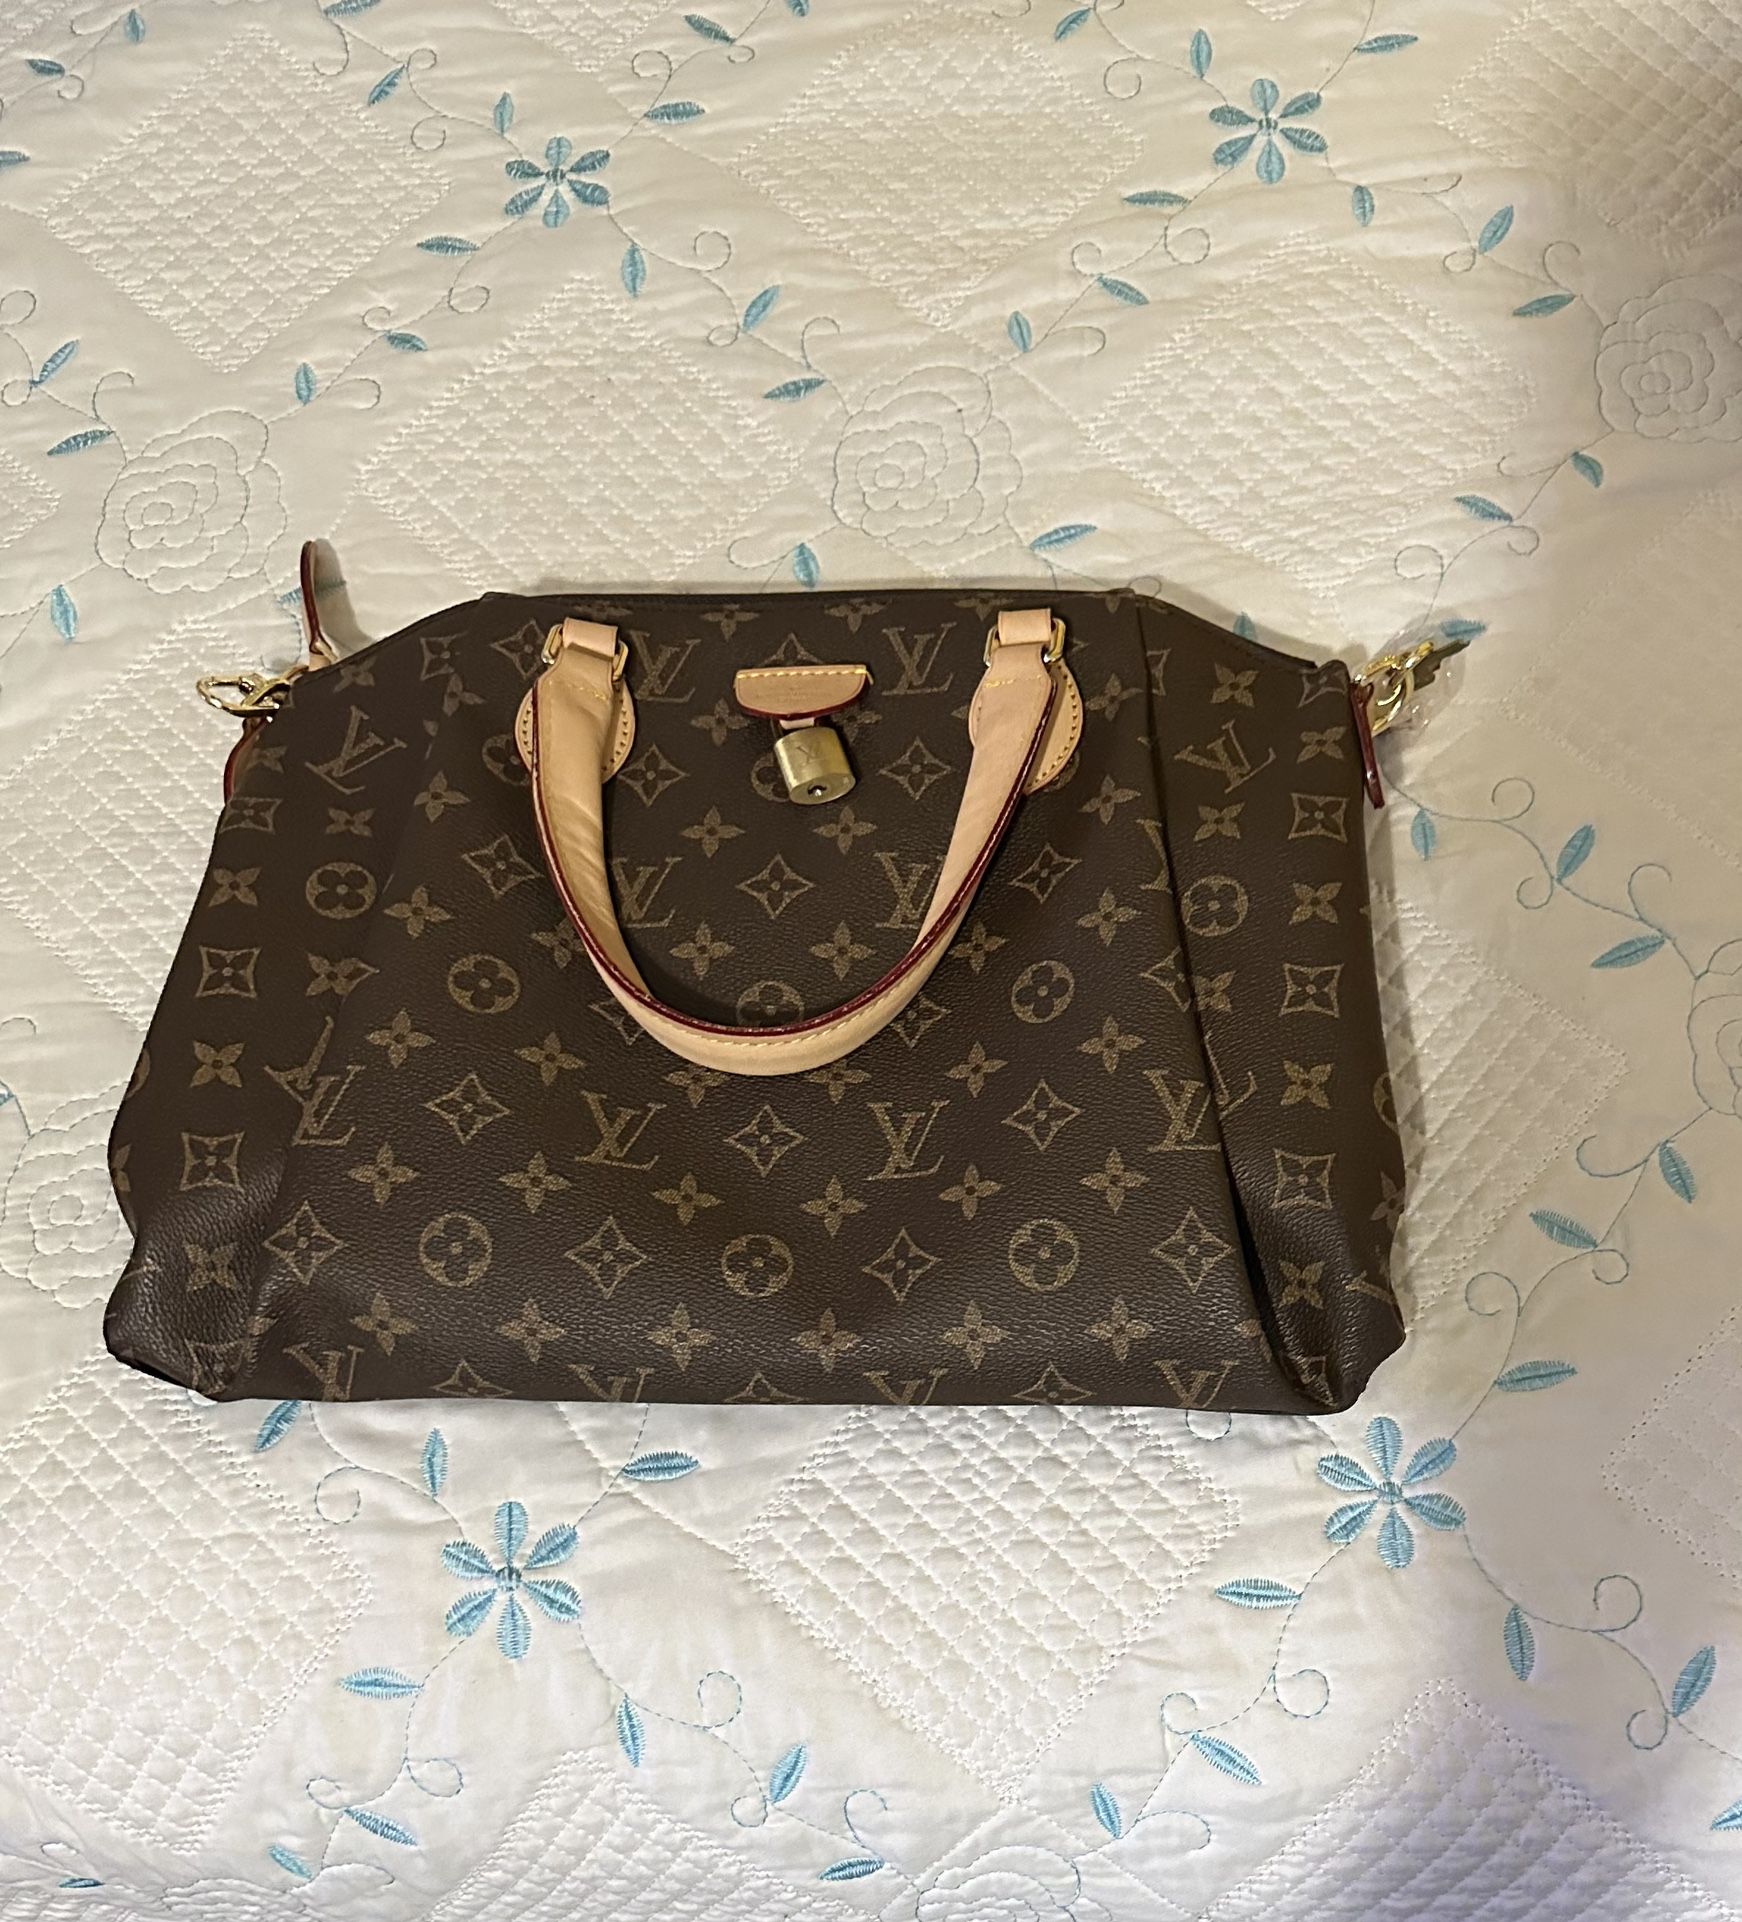 Louis vuitton for sale - New and Used - OfferUp